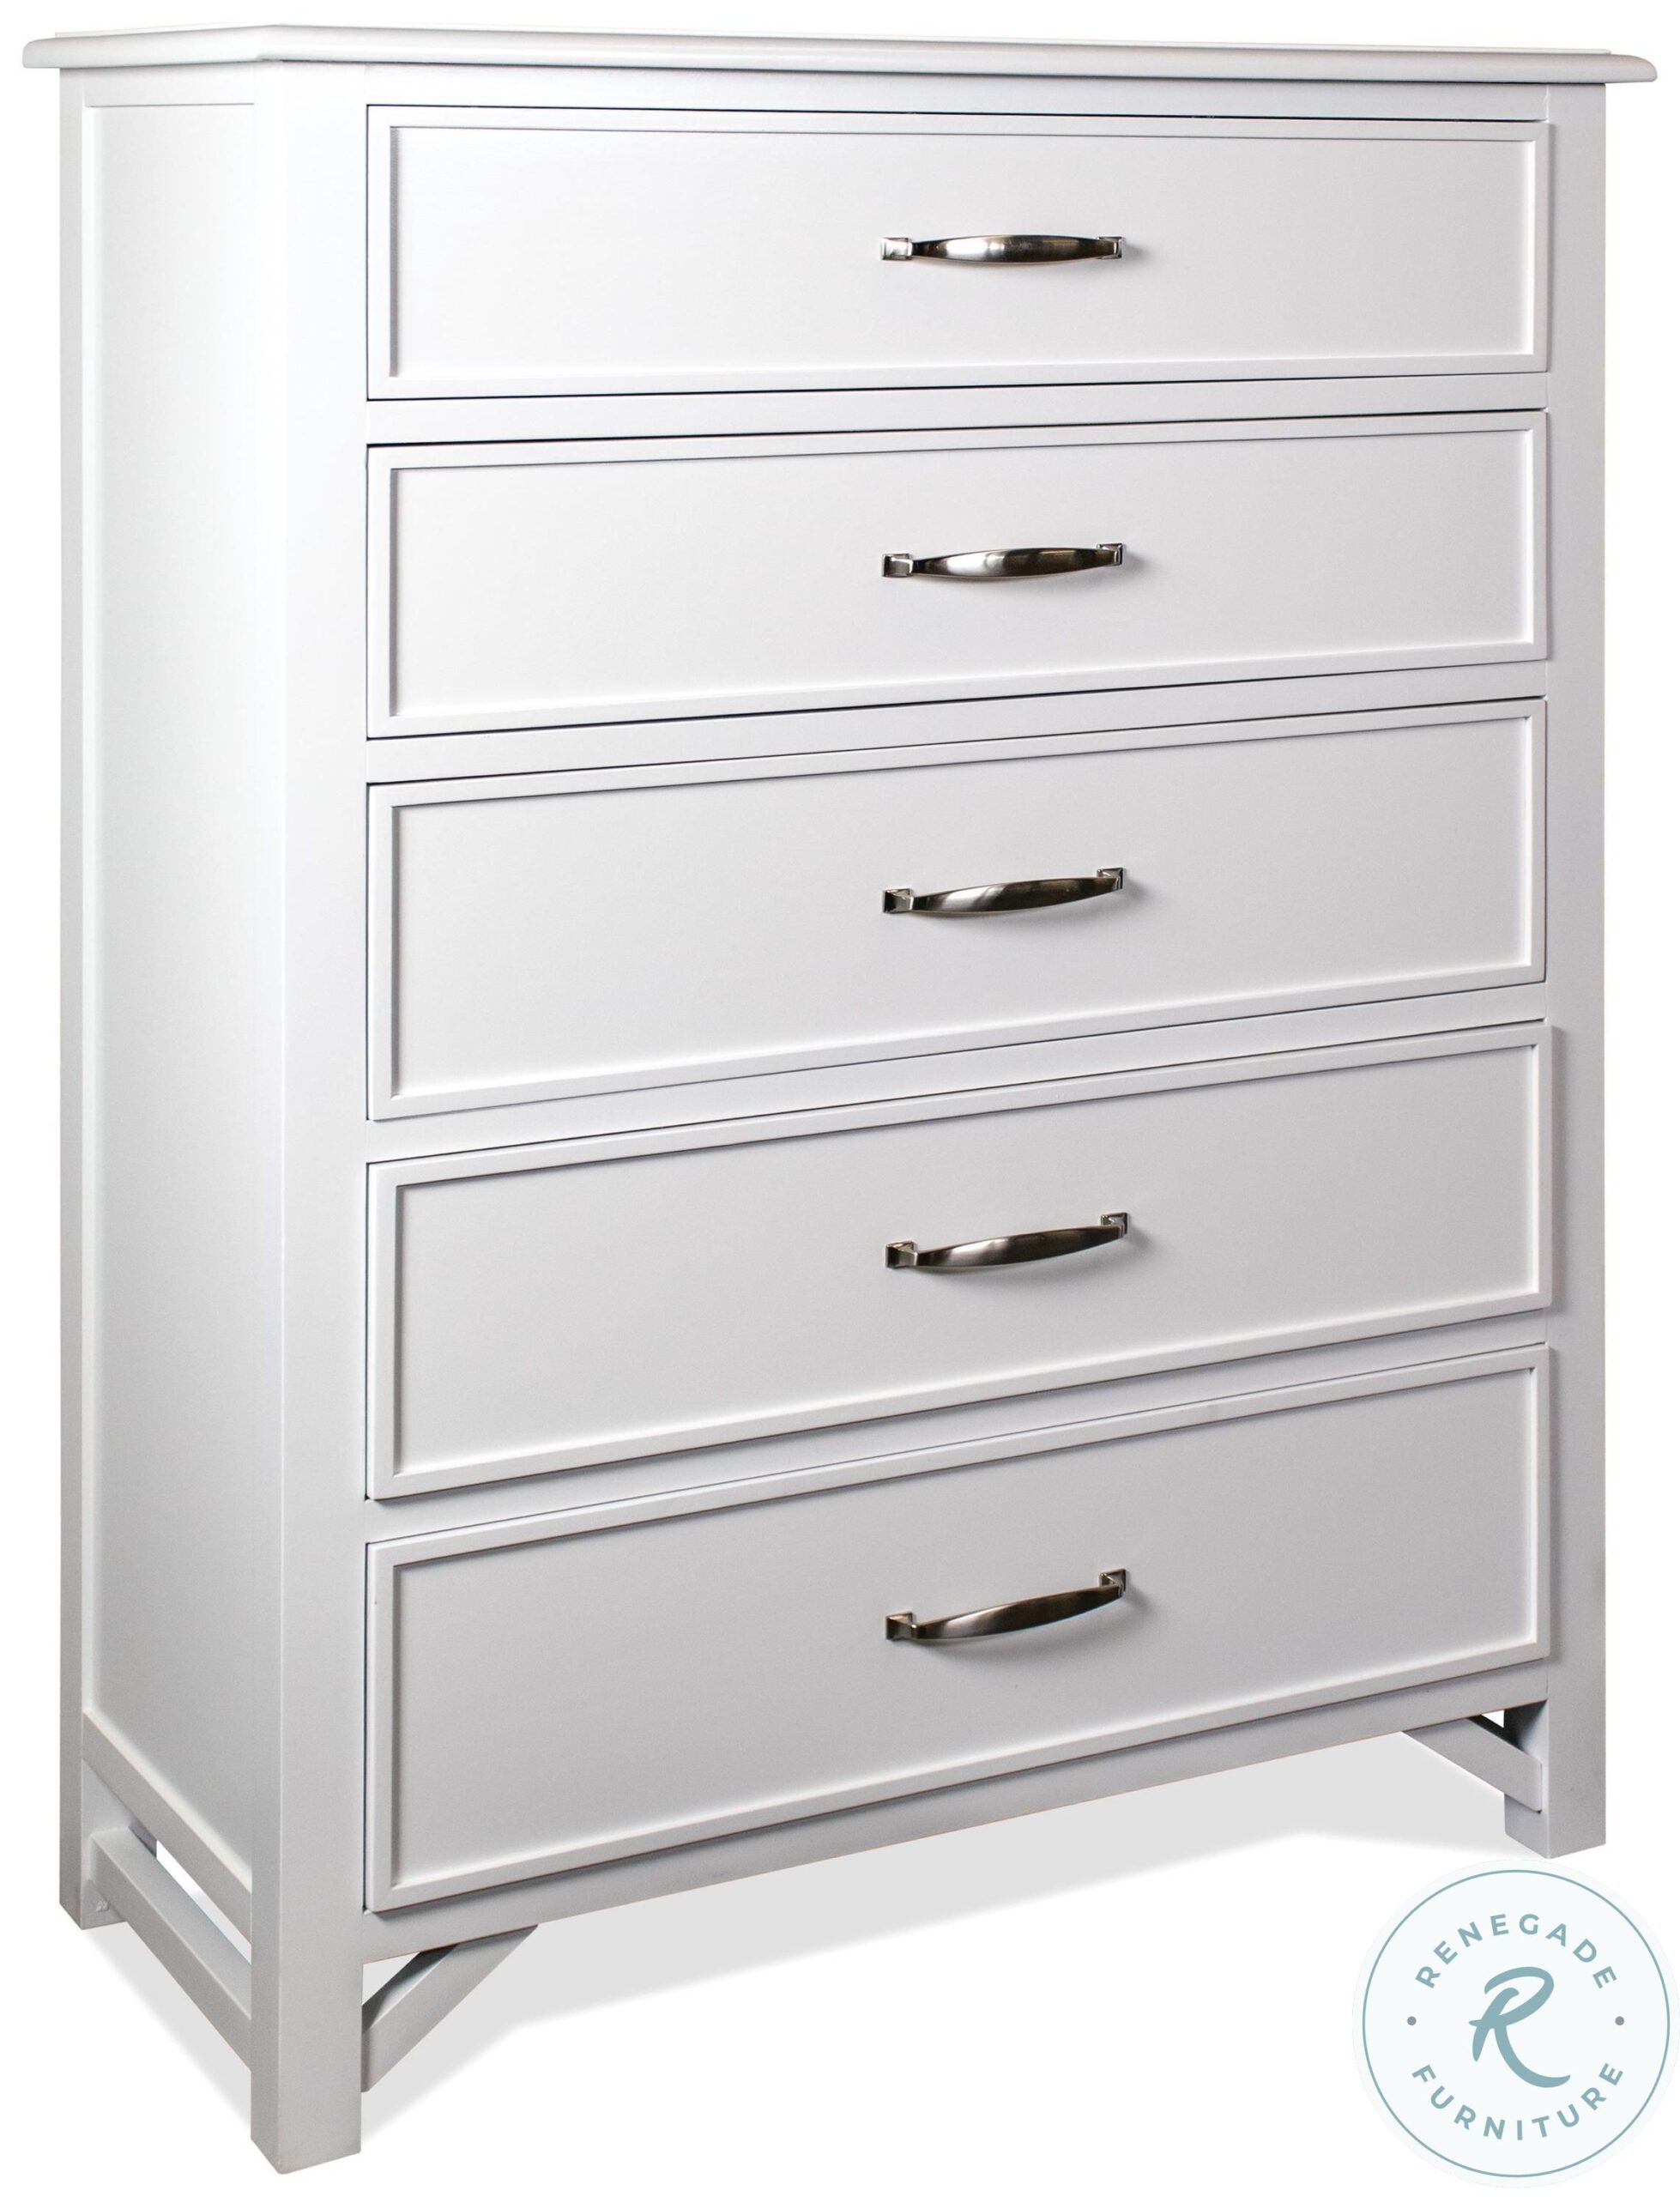 Talford Cotton Five Drawer Chest1 scaled